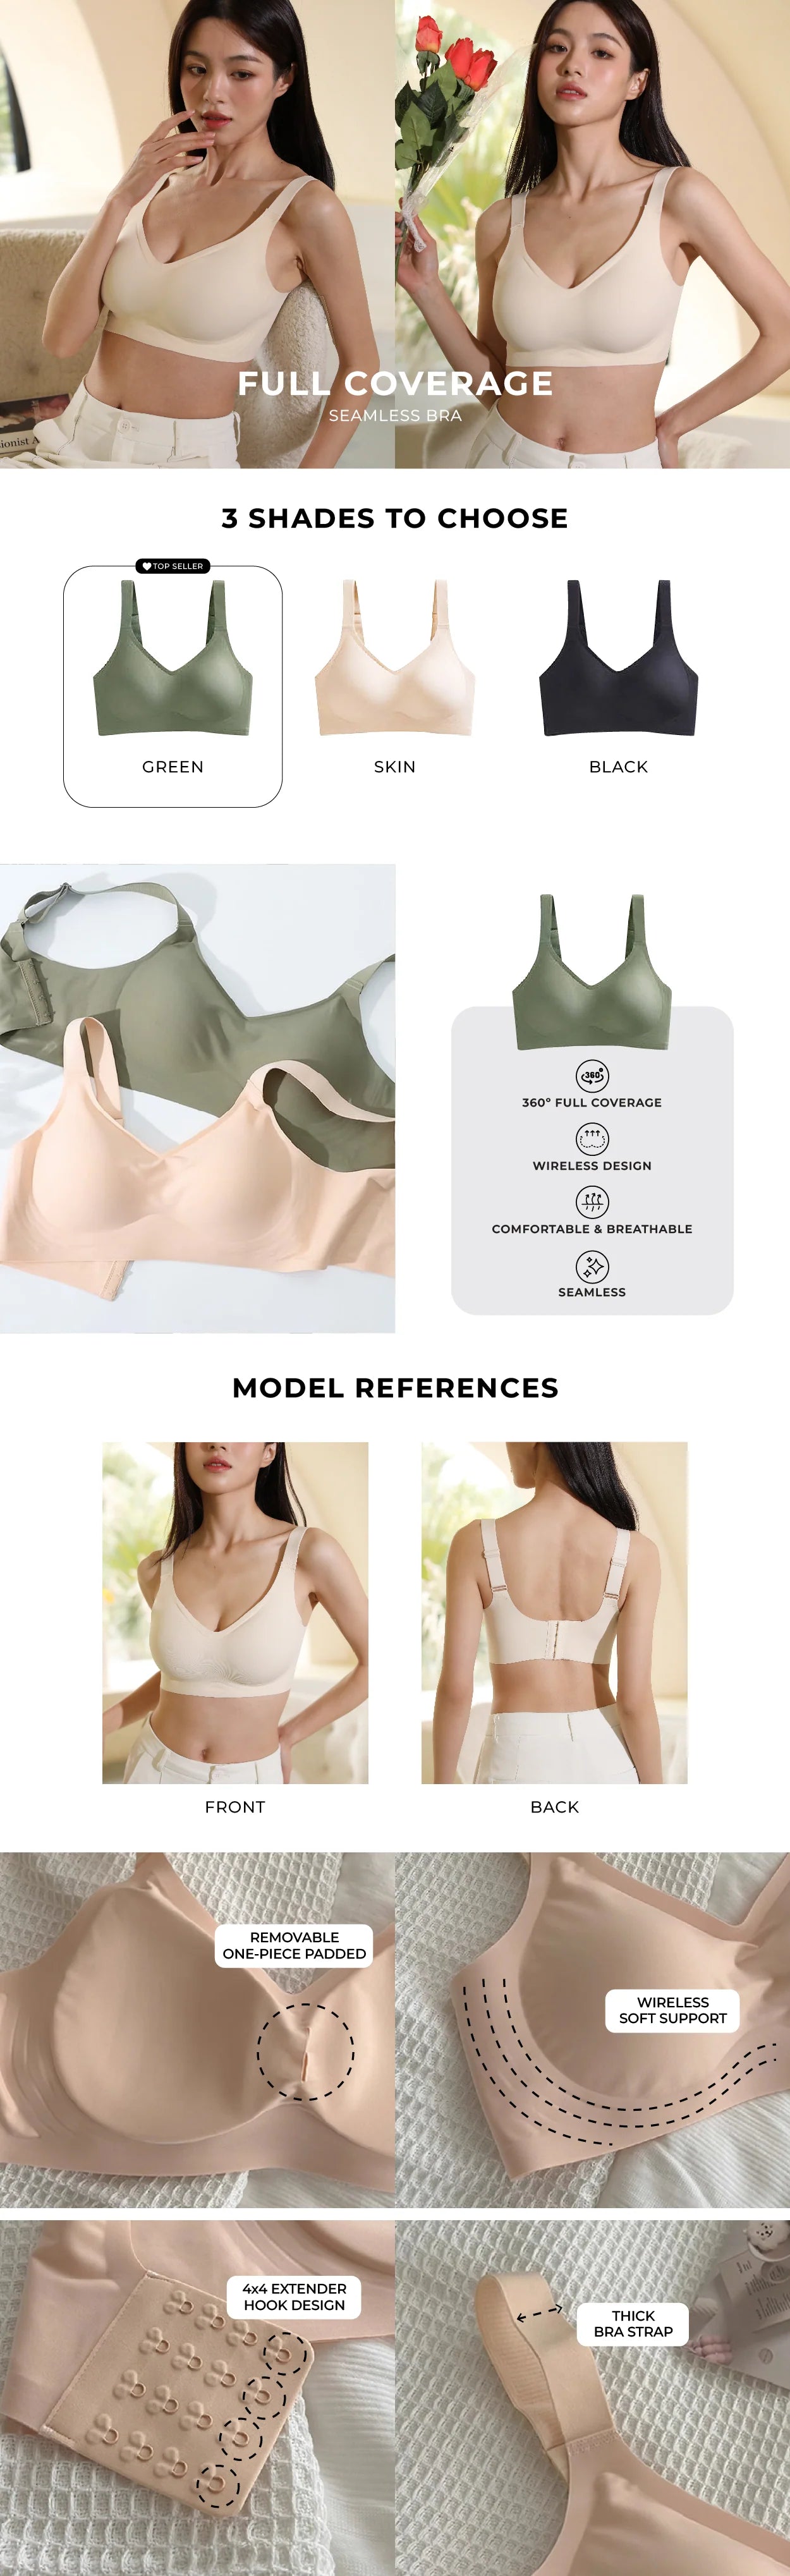 Chantelle's Secret presents the Full Coverage Seamless Bra Collection, available in three shades: Green, Skin, and Black. Each bra is crafted for optimal comfort with features like 360° full coverage, wireless support, and a 4x4 extender hook design, shown in detailed shots and model references.